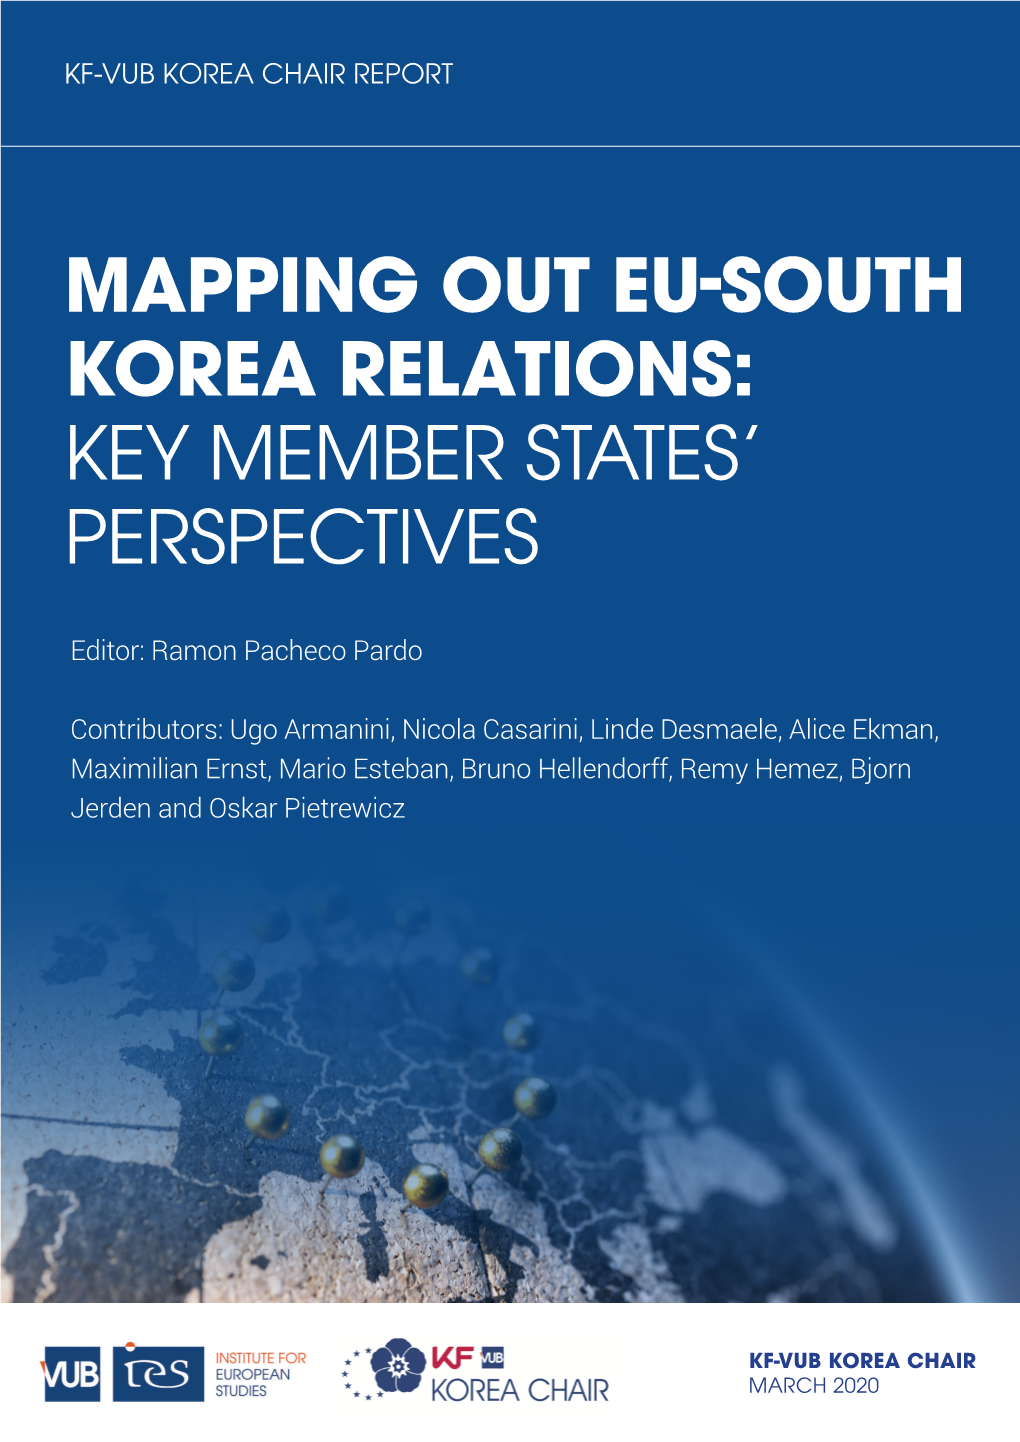 Mapping out Eu-South Korea Relations: Key Member States' Perspectives